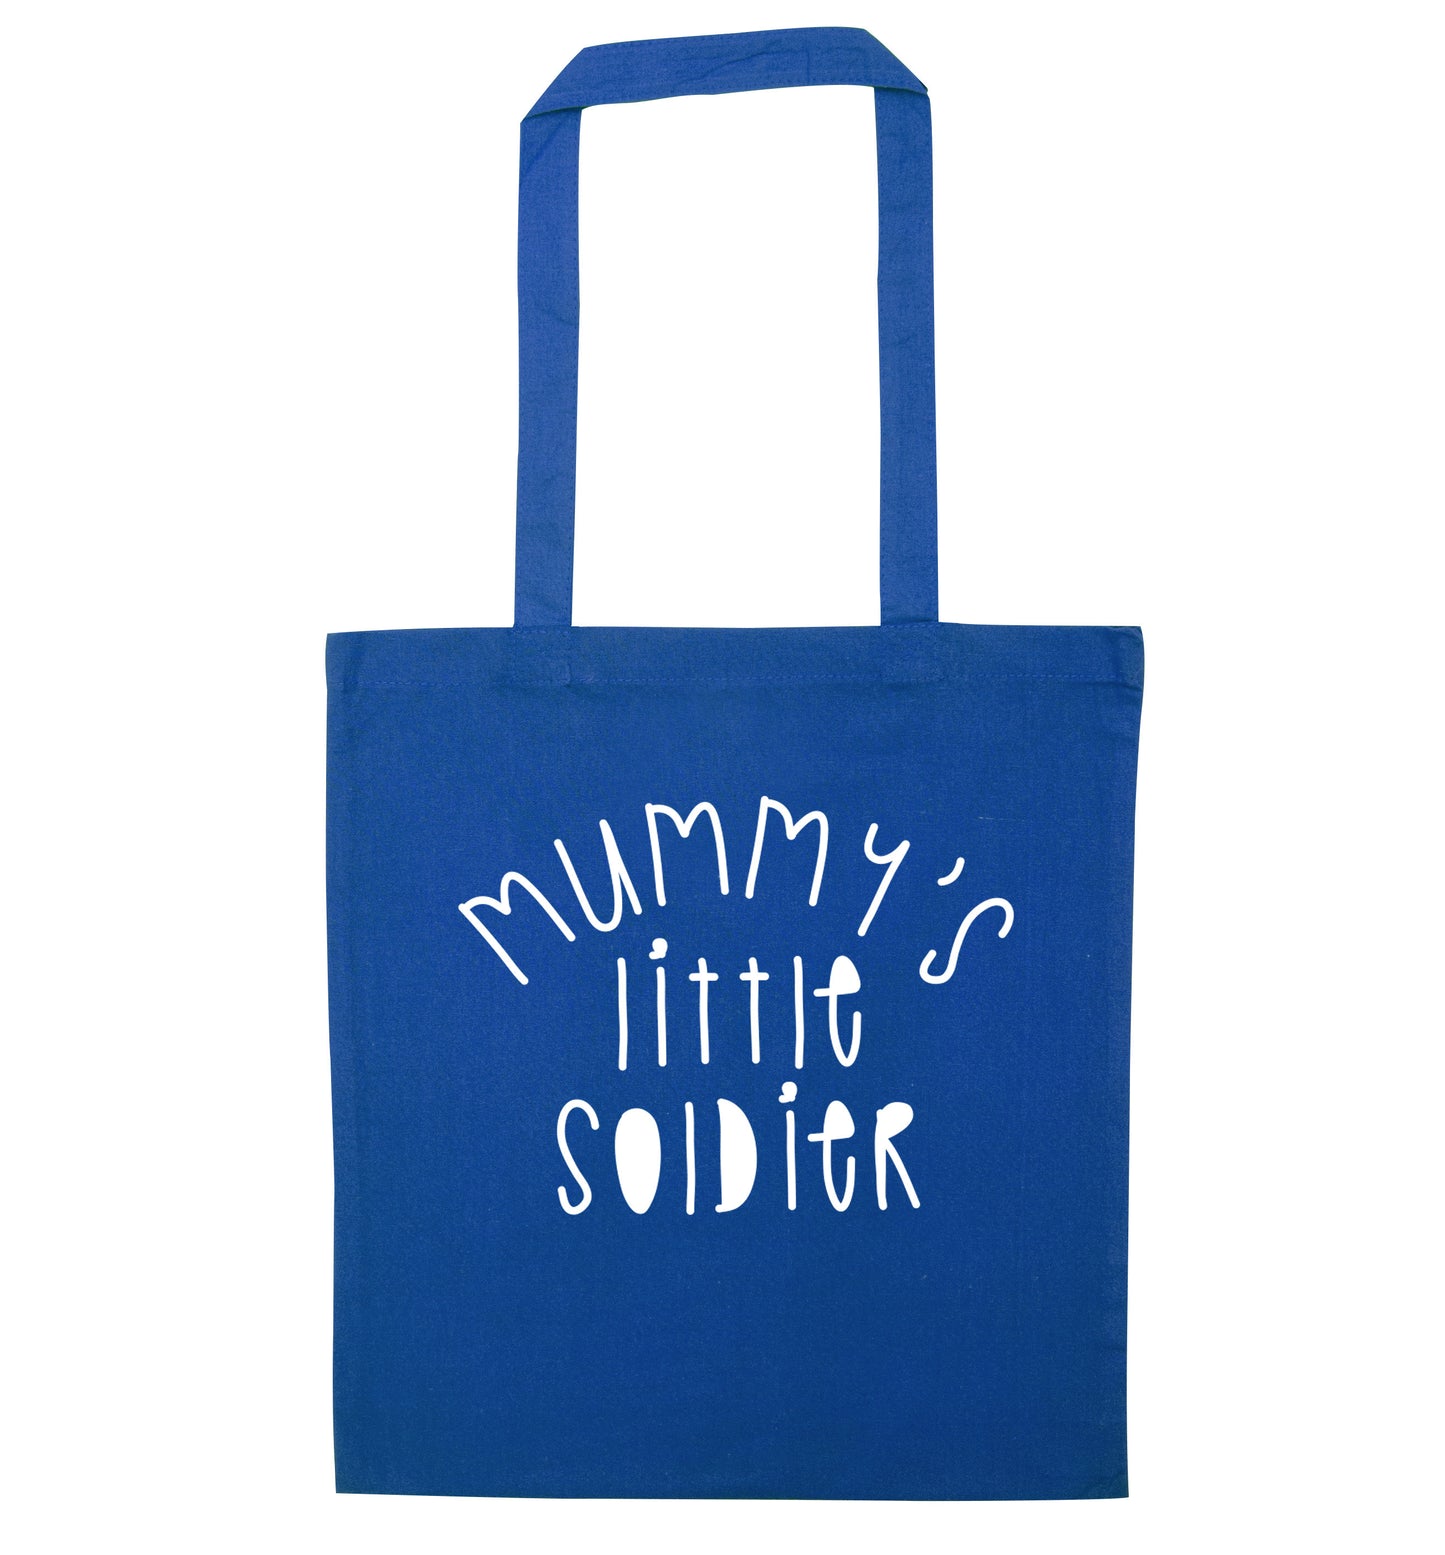 Mummy's little soldier blue tote bag